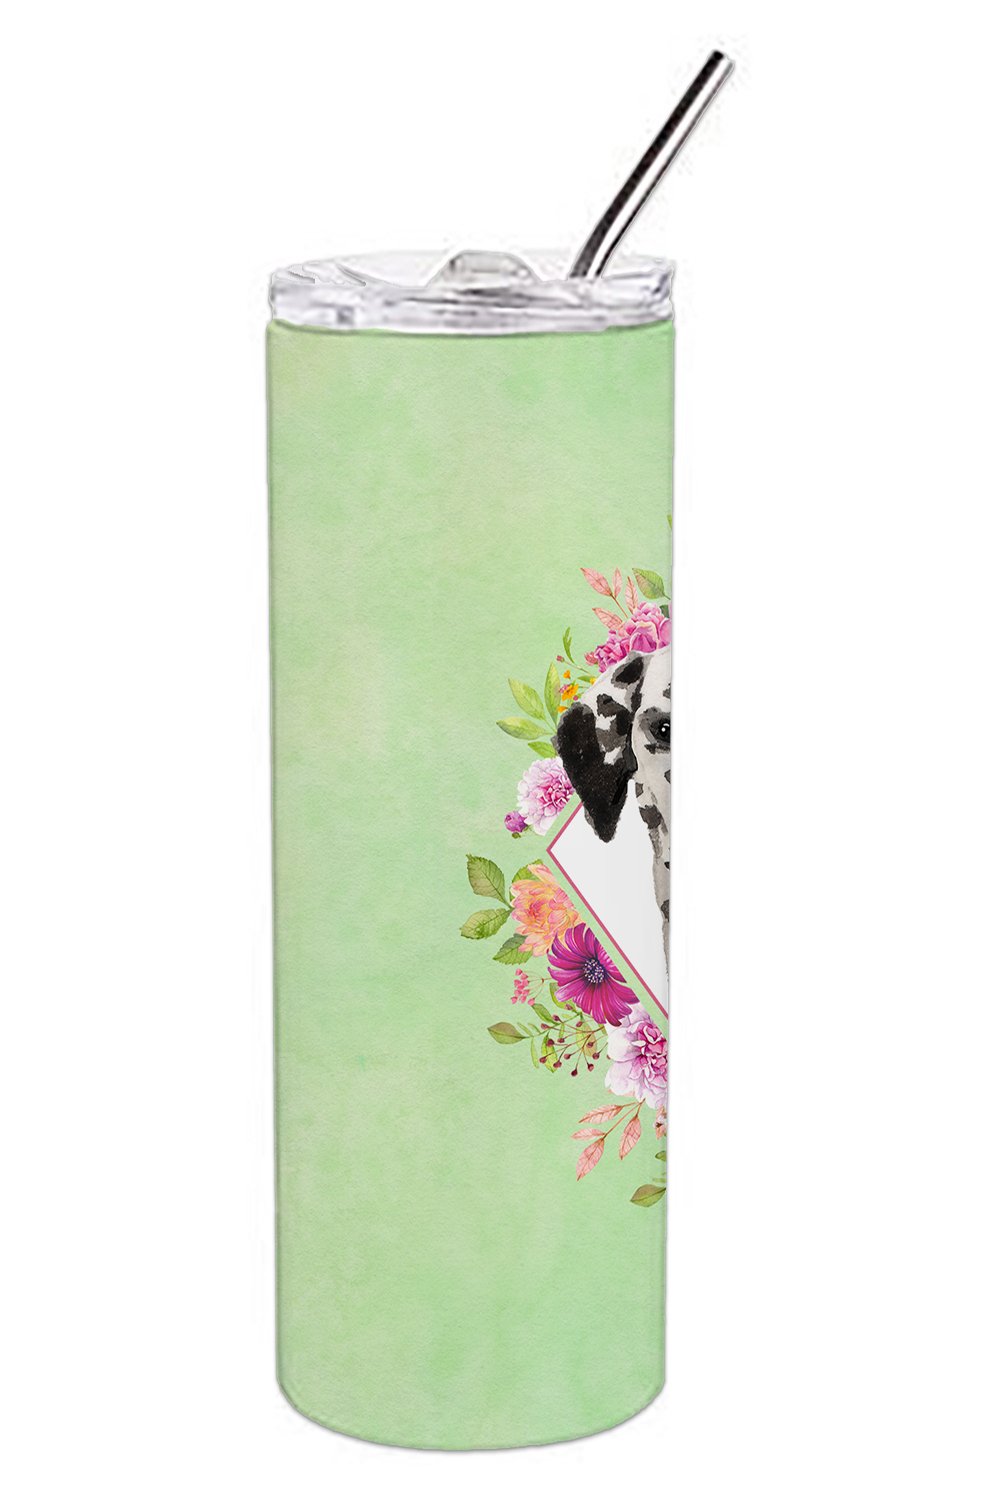 Dalmatian Green Flowers Double Walled Stainless Steel 20 oz Skinny Tumbler CK4402TBL20 by Caroline's Treasures